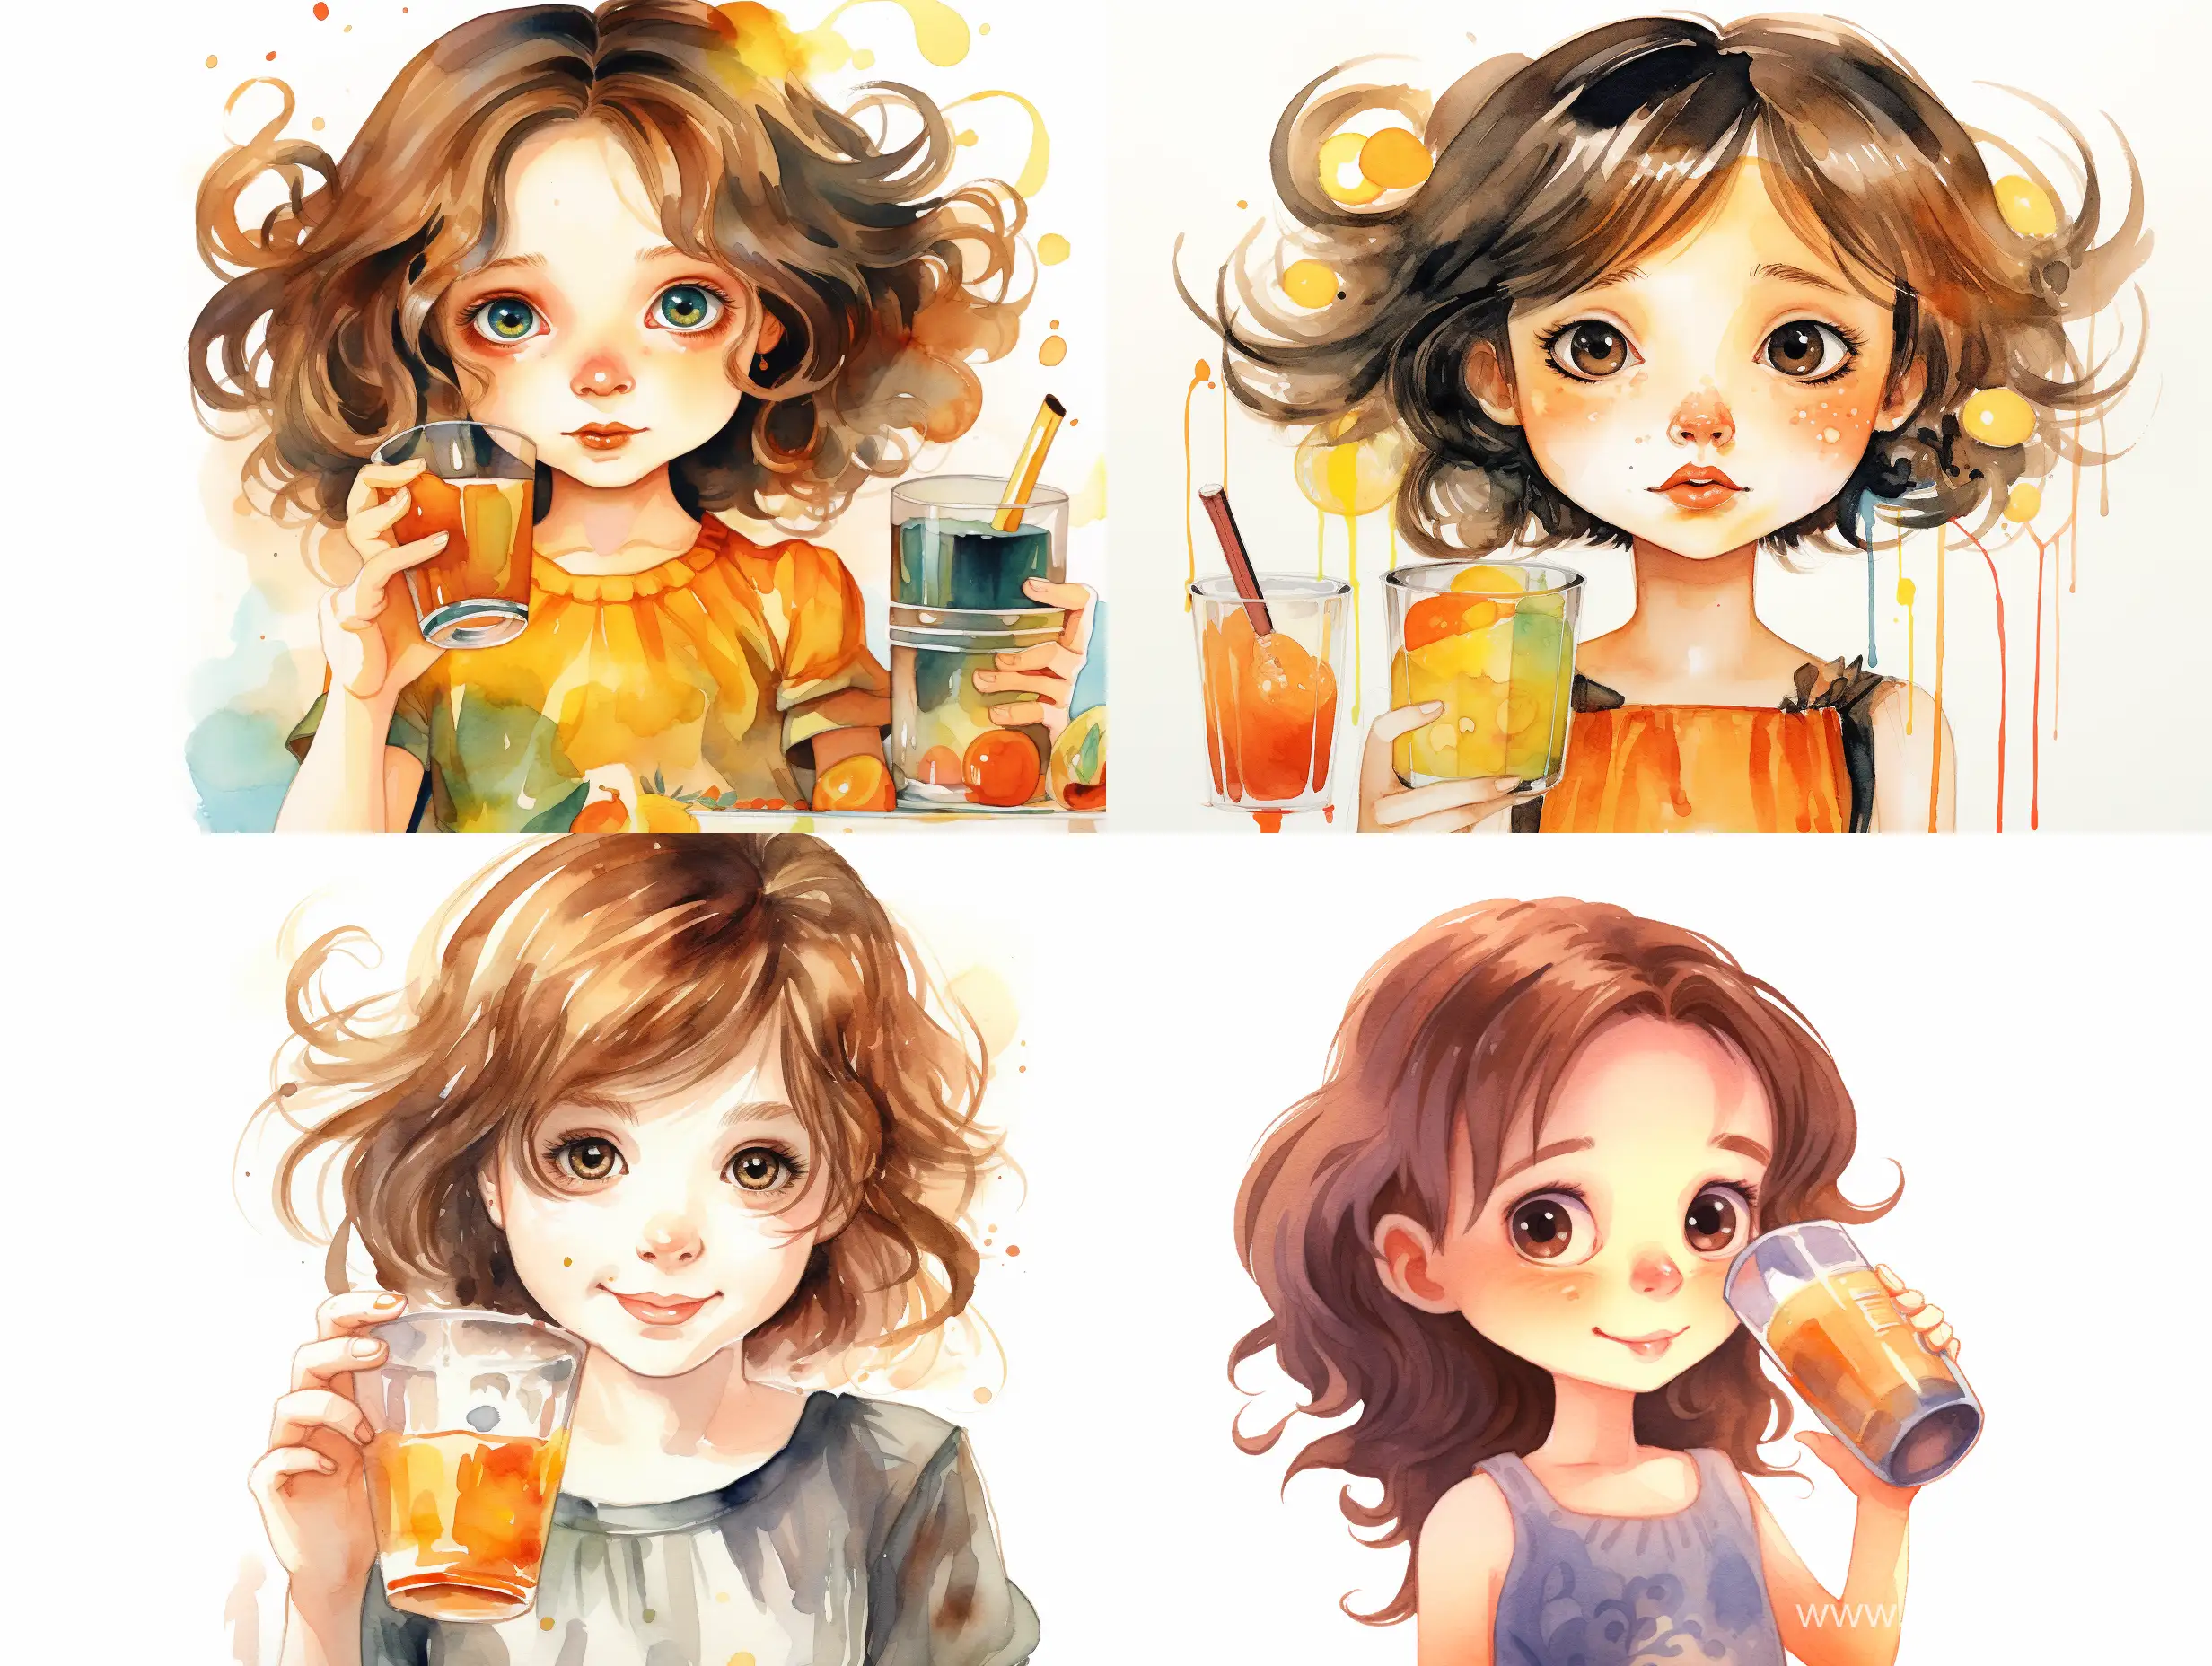 A three-year-old girl, light brown hair above her shoulders, with brown eyes, long eyelashes, small mouth, thin lips, drinks orange juice from a bottle with a nipple,stylized caricature, decorative, flat illustration, on a white background, watercolor, ink, Victor Ngai style, bright colors